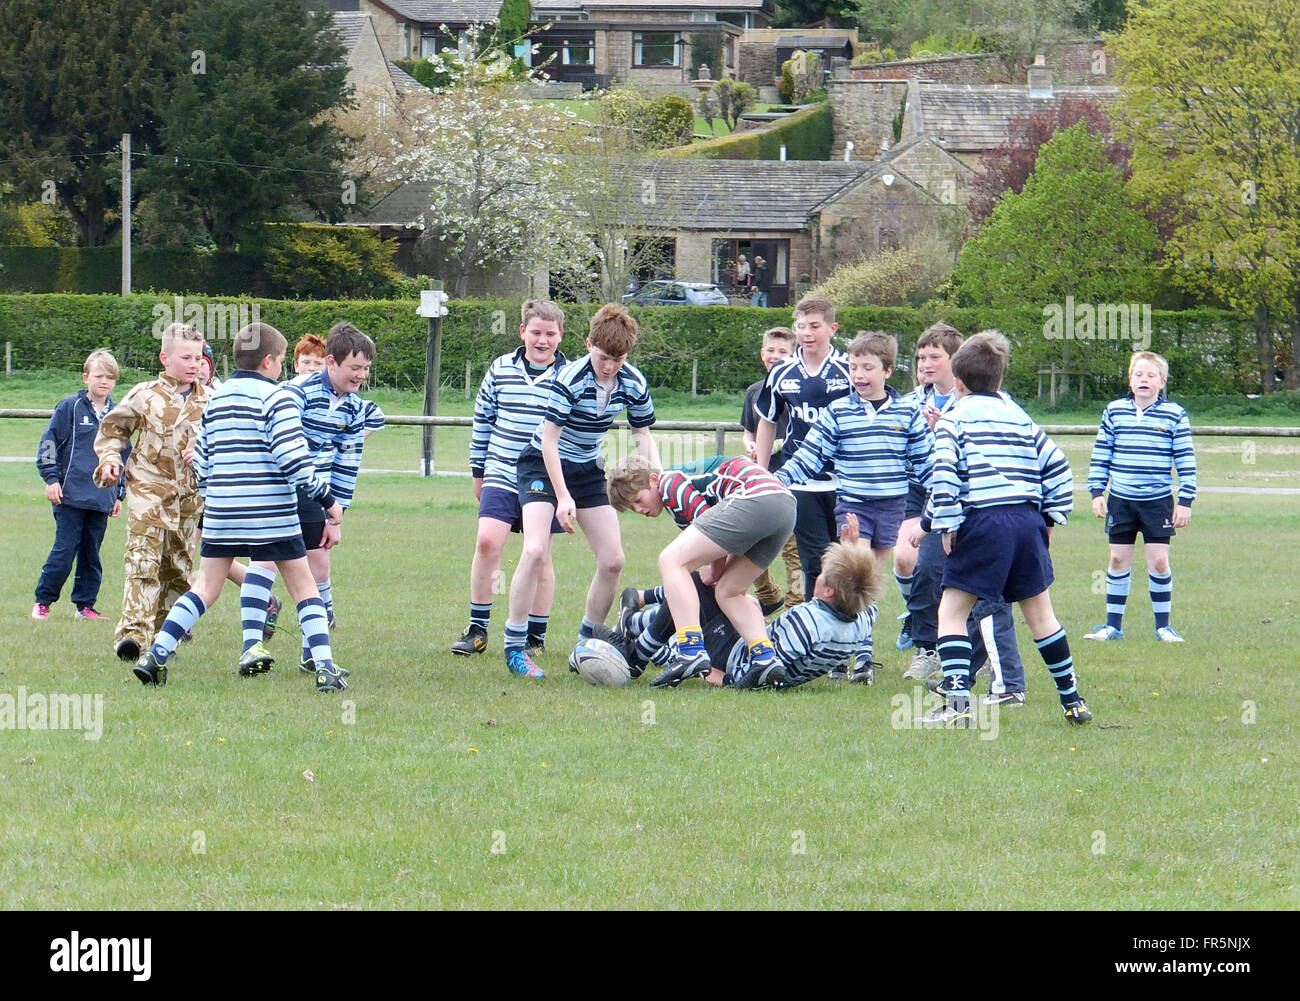 Boys playing rugby match Stock Photo